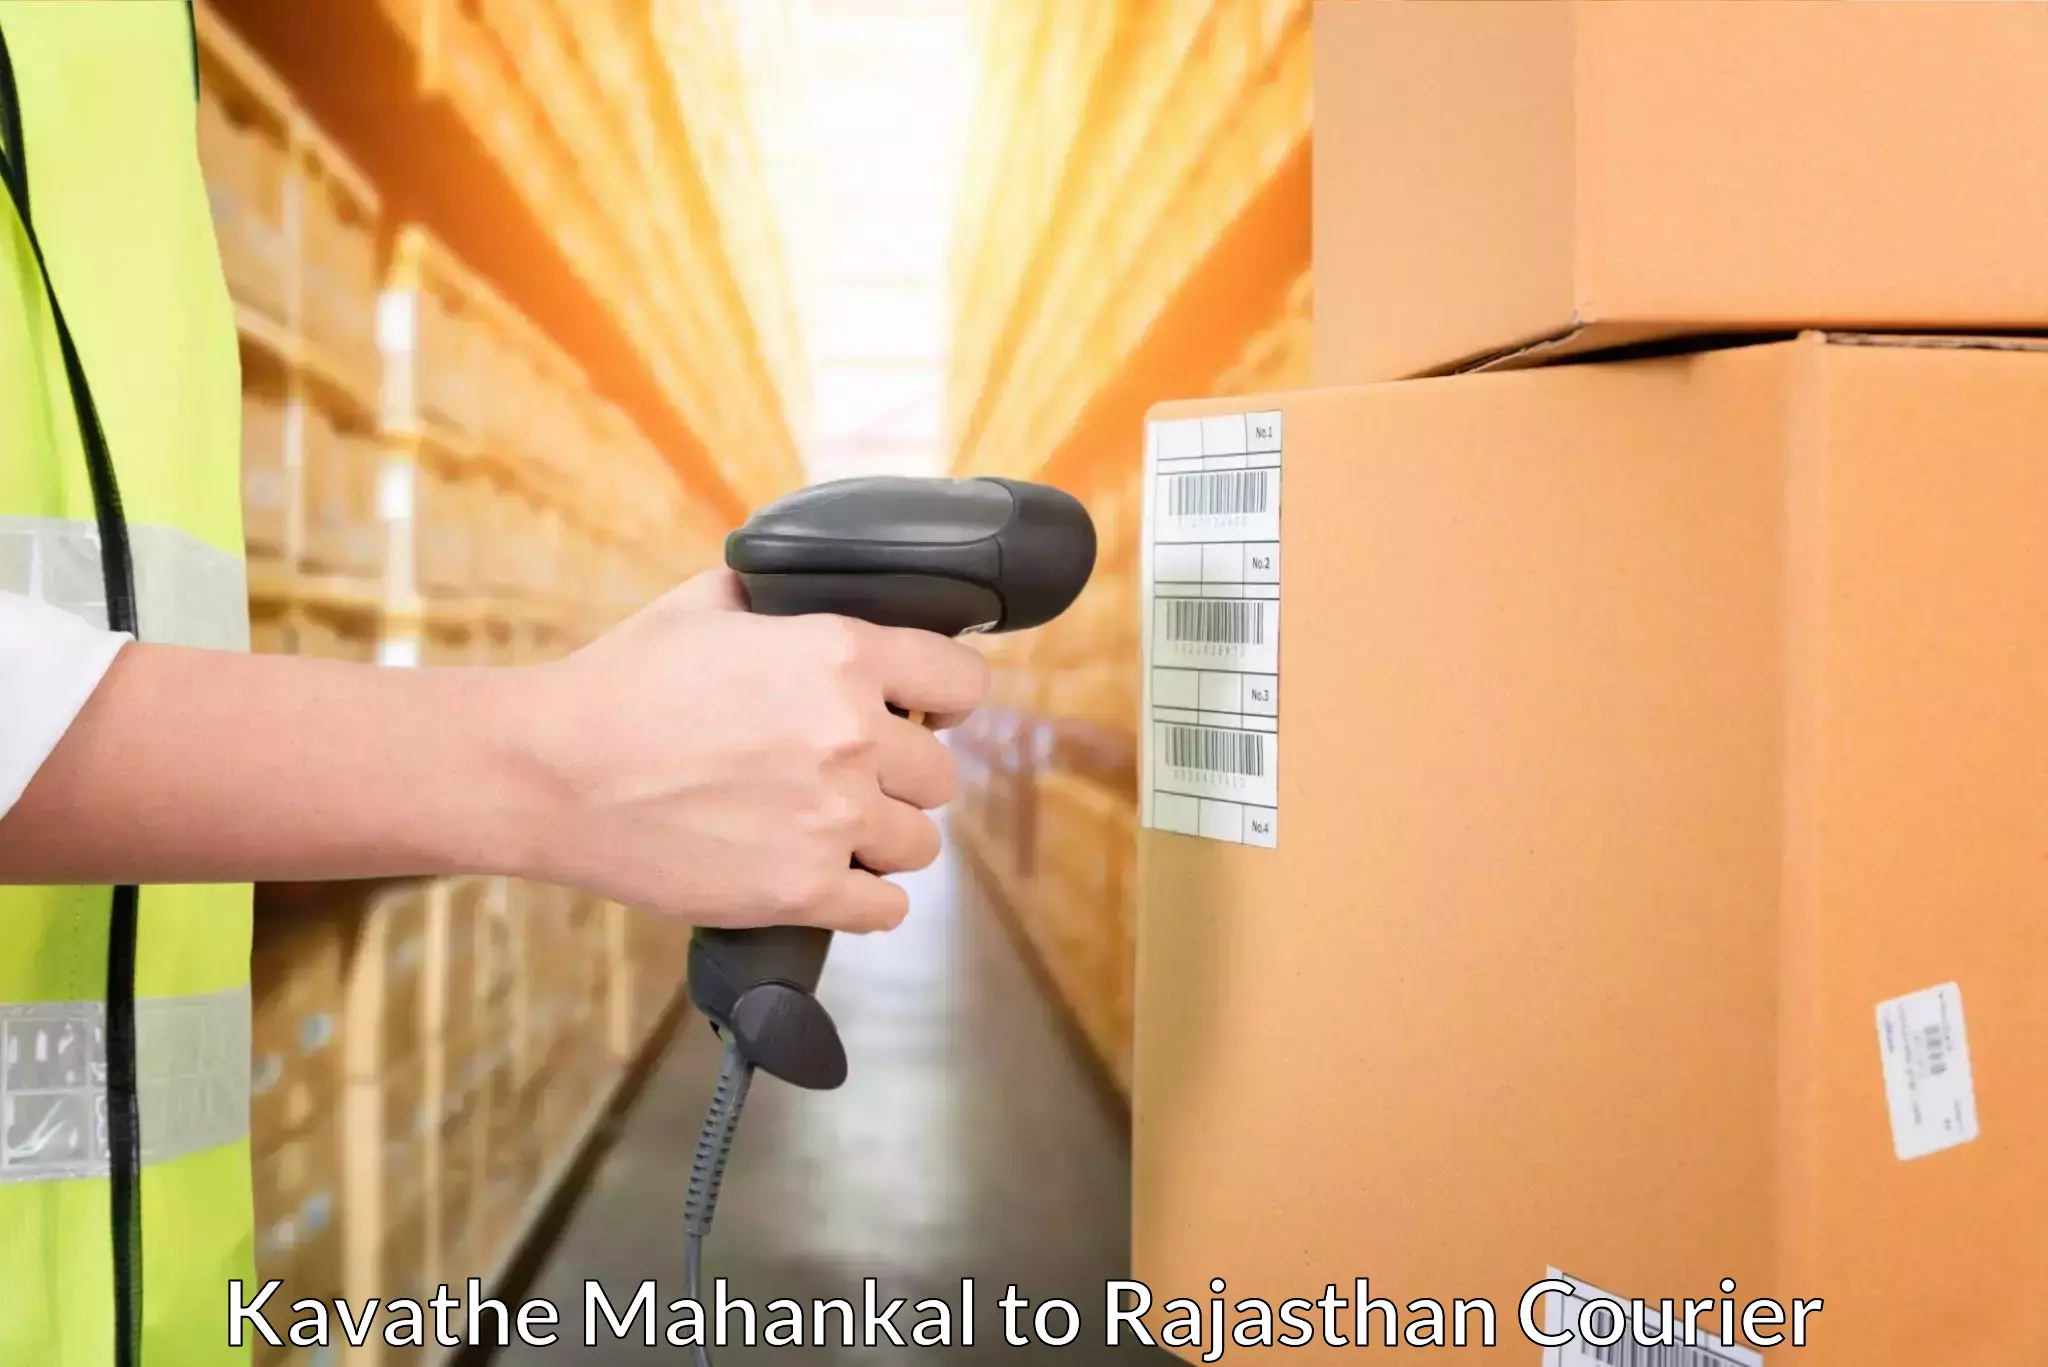 Flexible delivery schedules Kavathe Mahankal to Udaipurwati